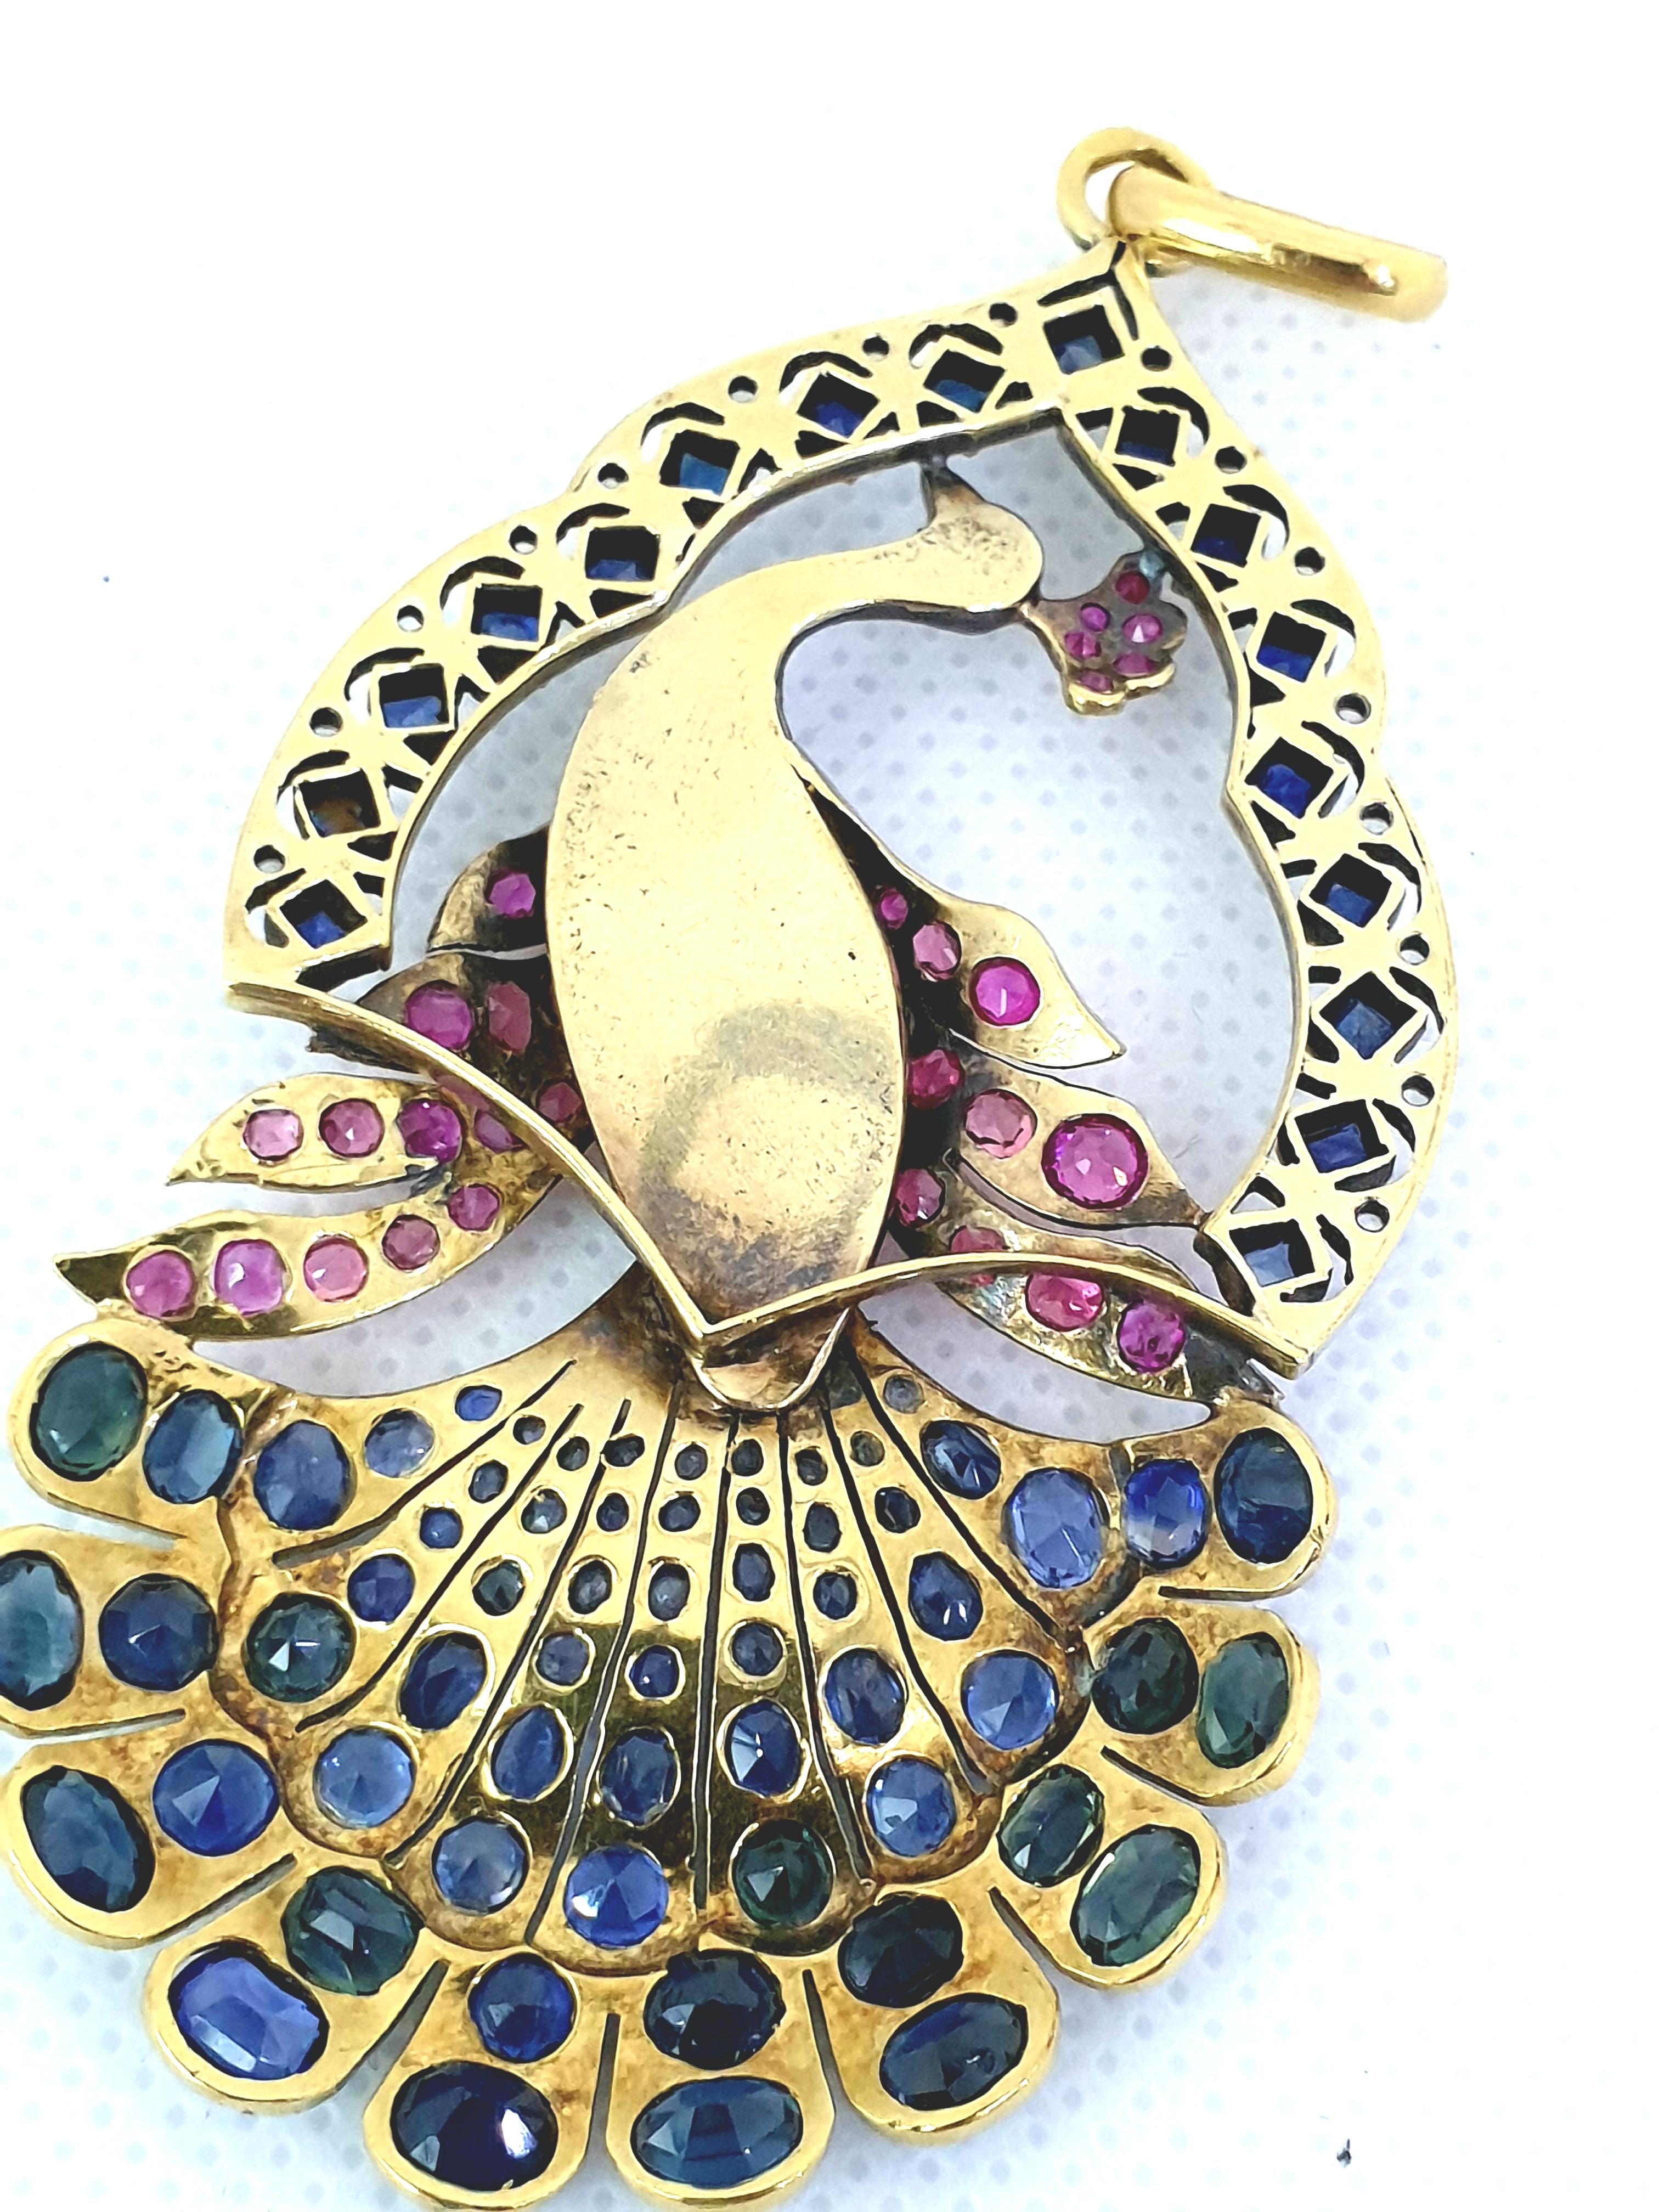 Antique peacock pendant Victorian time era. The peacock is set with variety gemstones:pink and blue sapphires and diamonds. Most of the stones are natural but few got replaced with synthetic stones. The body of the peacock is pave set with rose cut